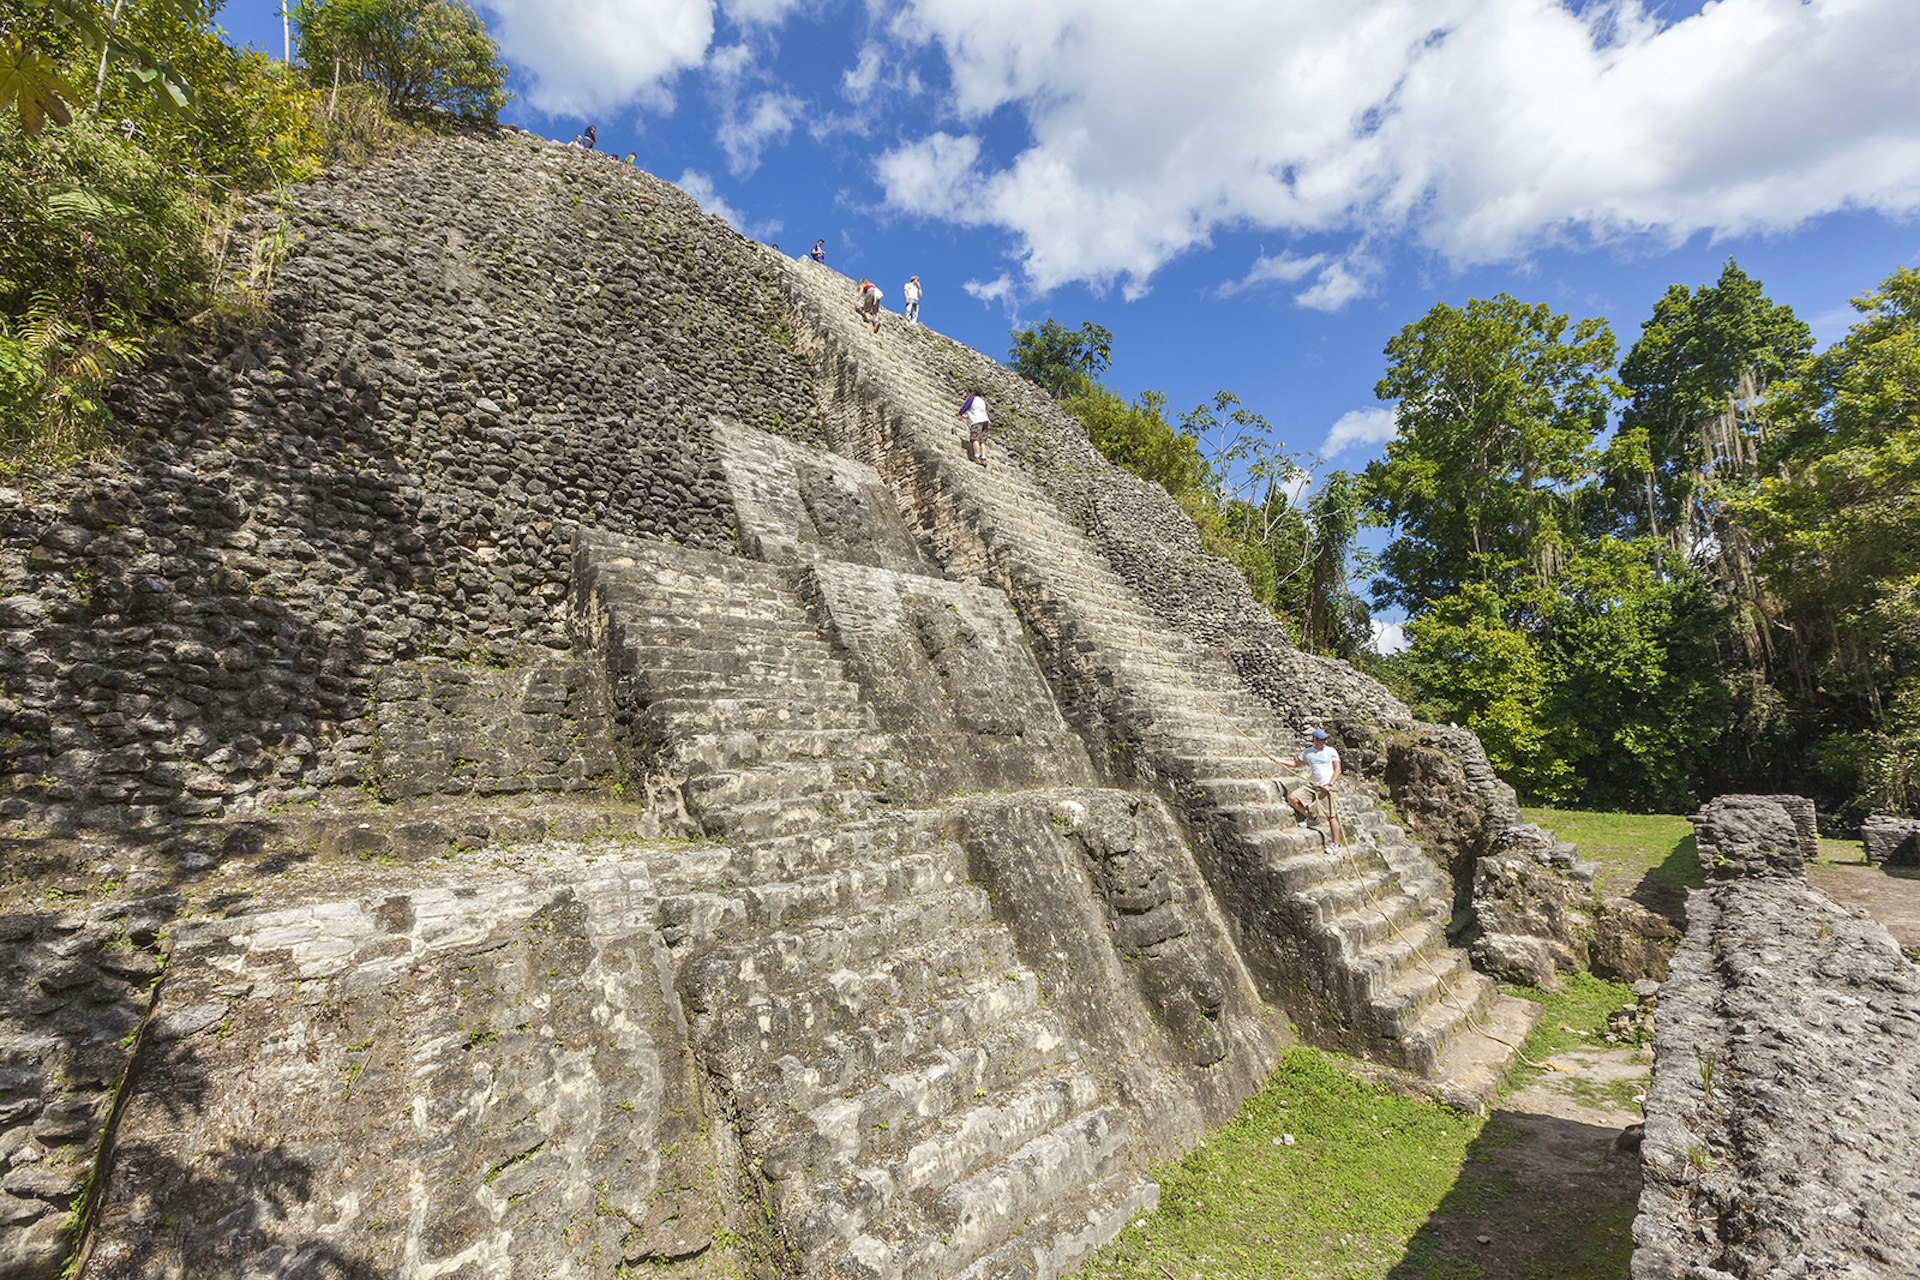 Visitors climb to the top of the Maya ruins in Lamanai, Belize © Patrick J Endres - AlaskaPhotoGraphics / Getty Images